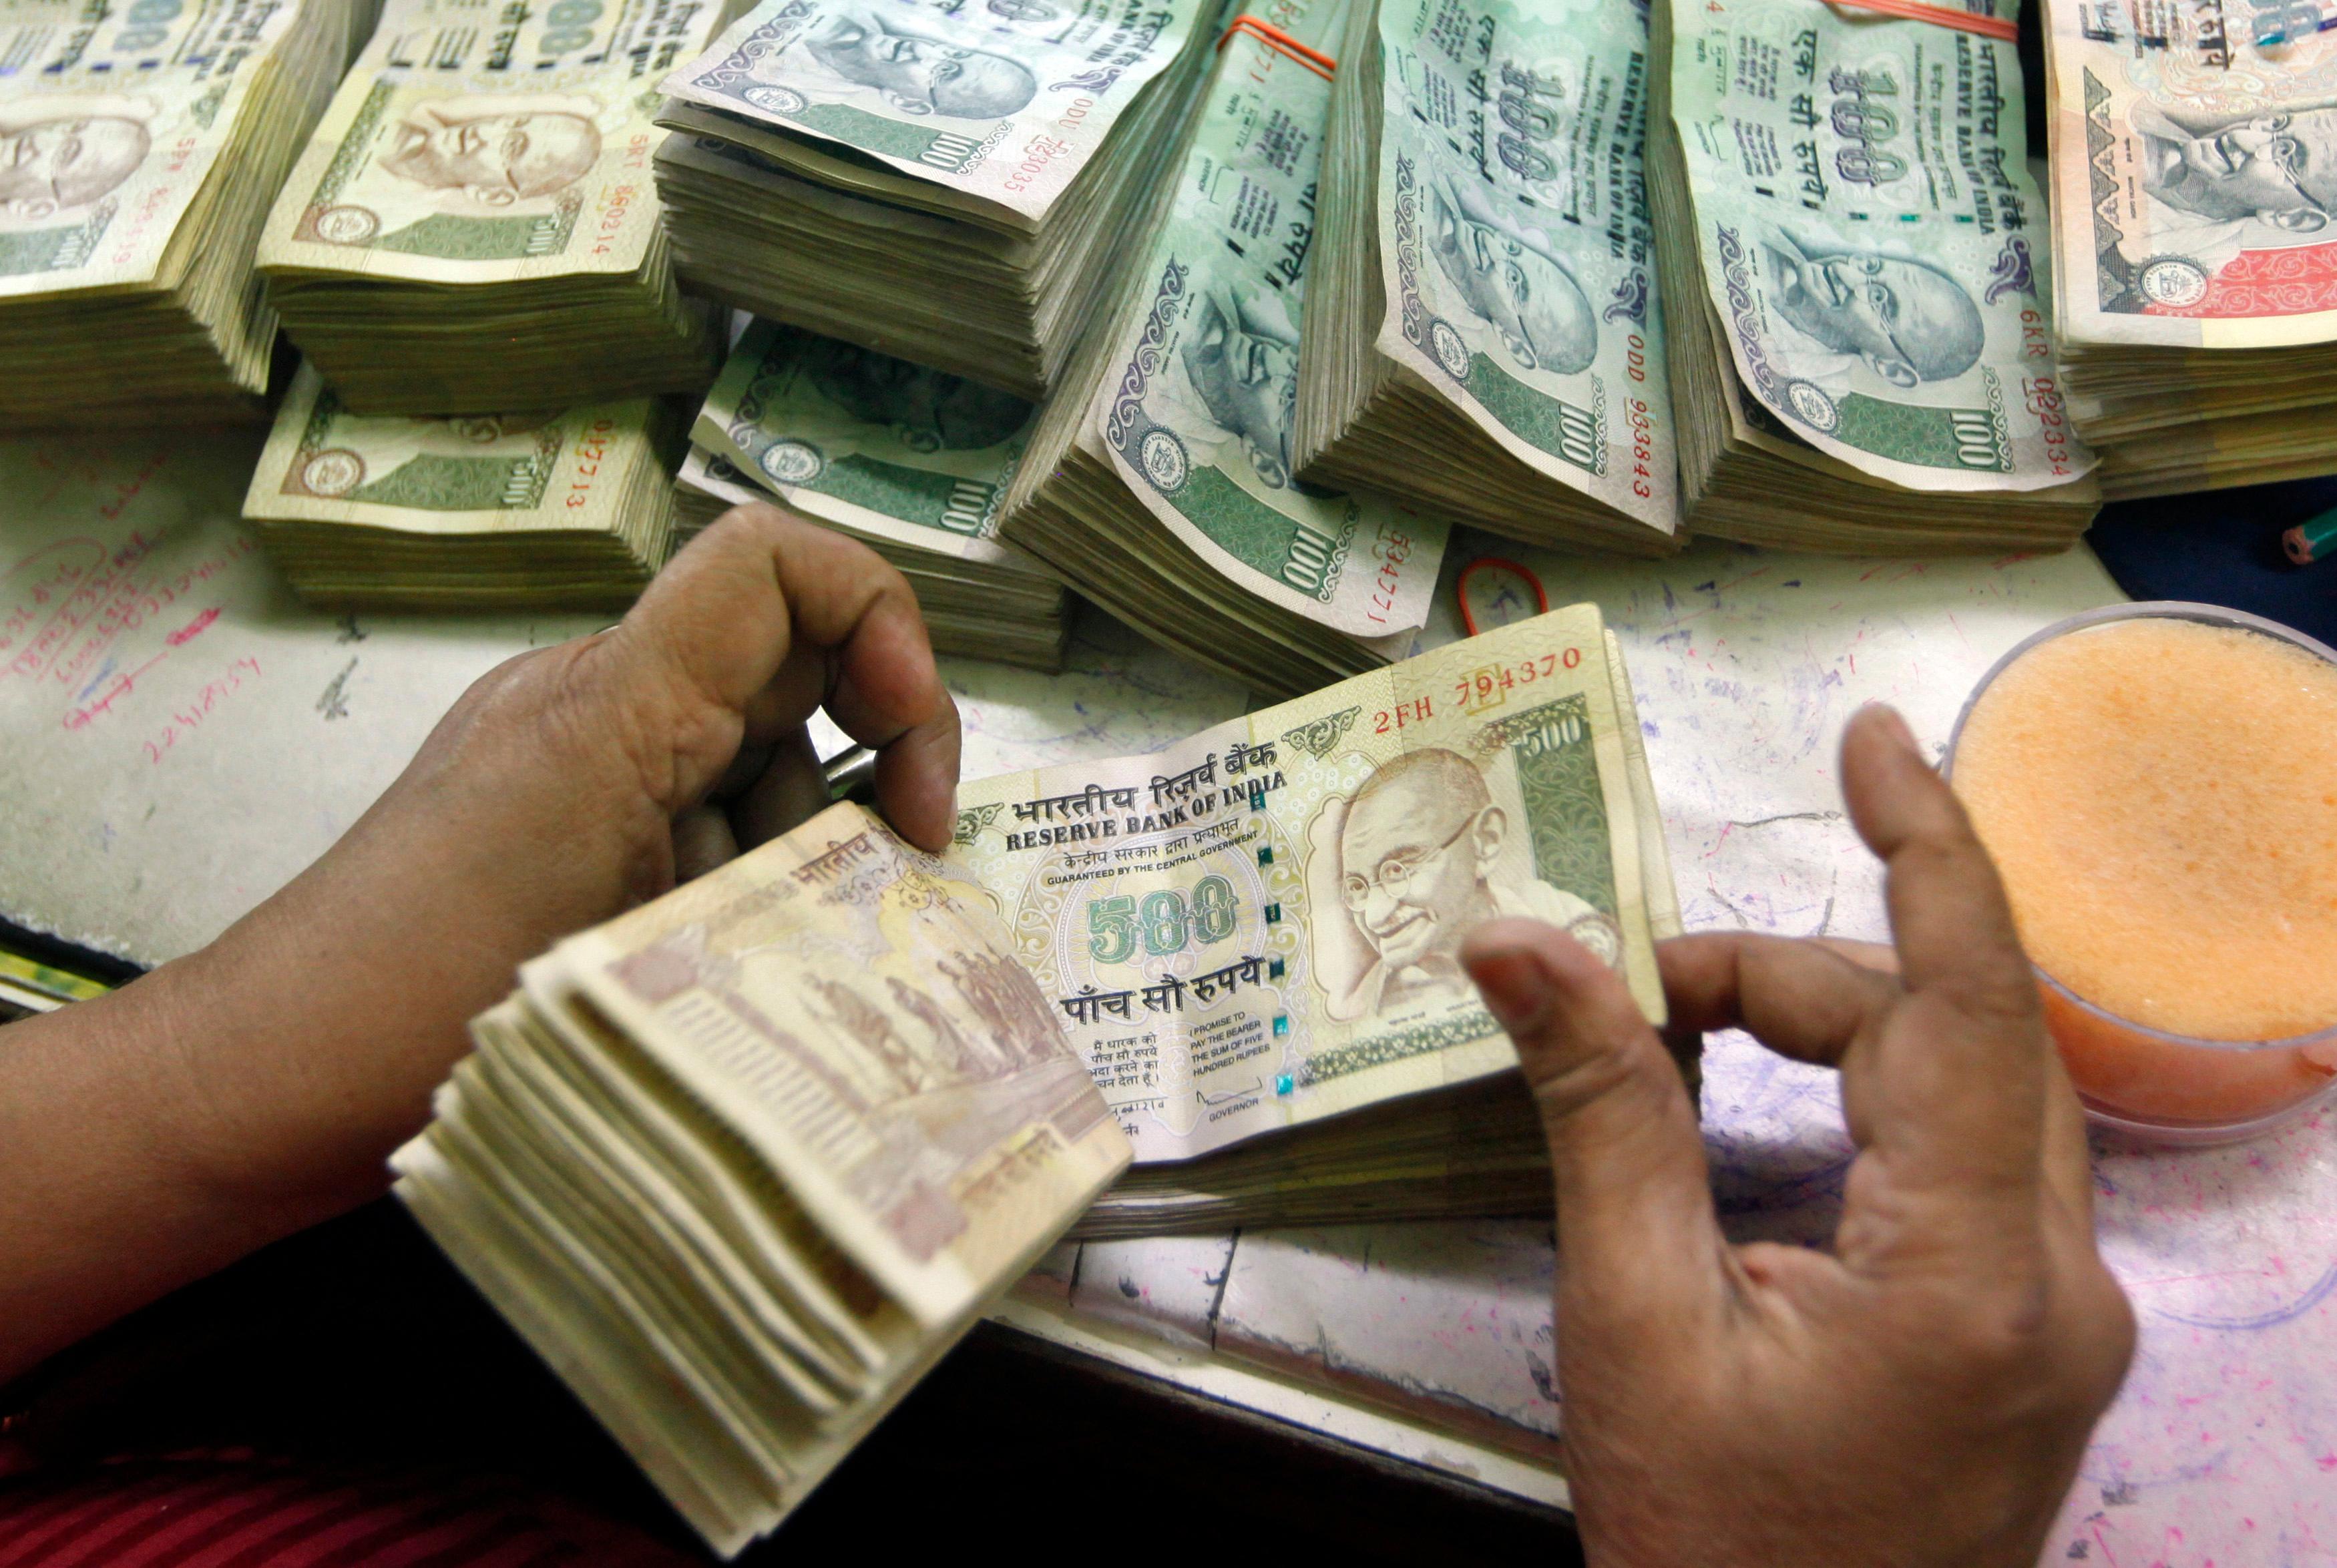 India’s forex reserves hit a new high of $340B